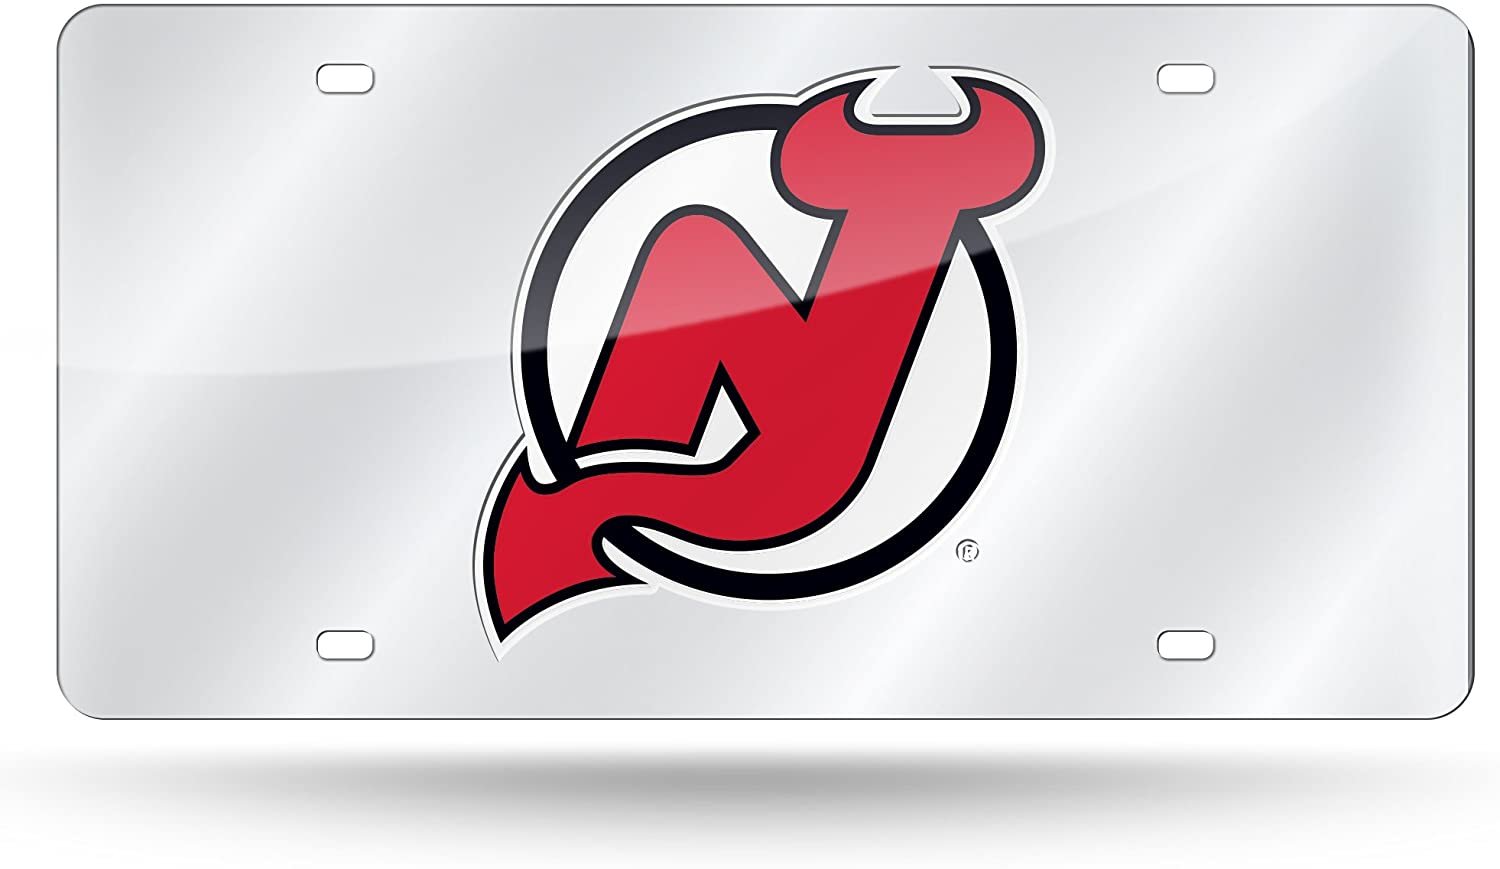 New Jersey Devils Premium Laser Cut Tag License Plate, Mirrored Acrylic Inlaid, 12x6 Inch